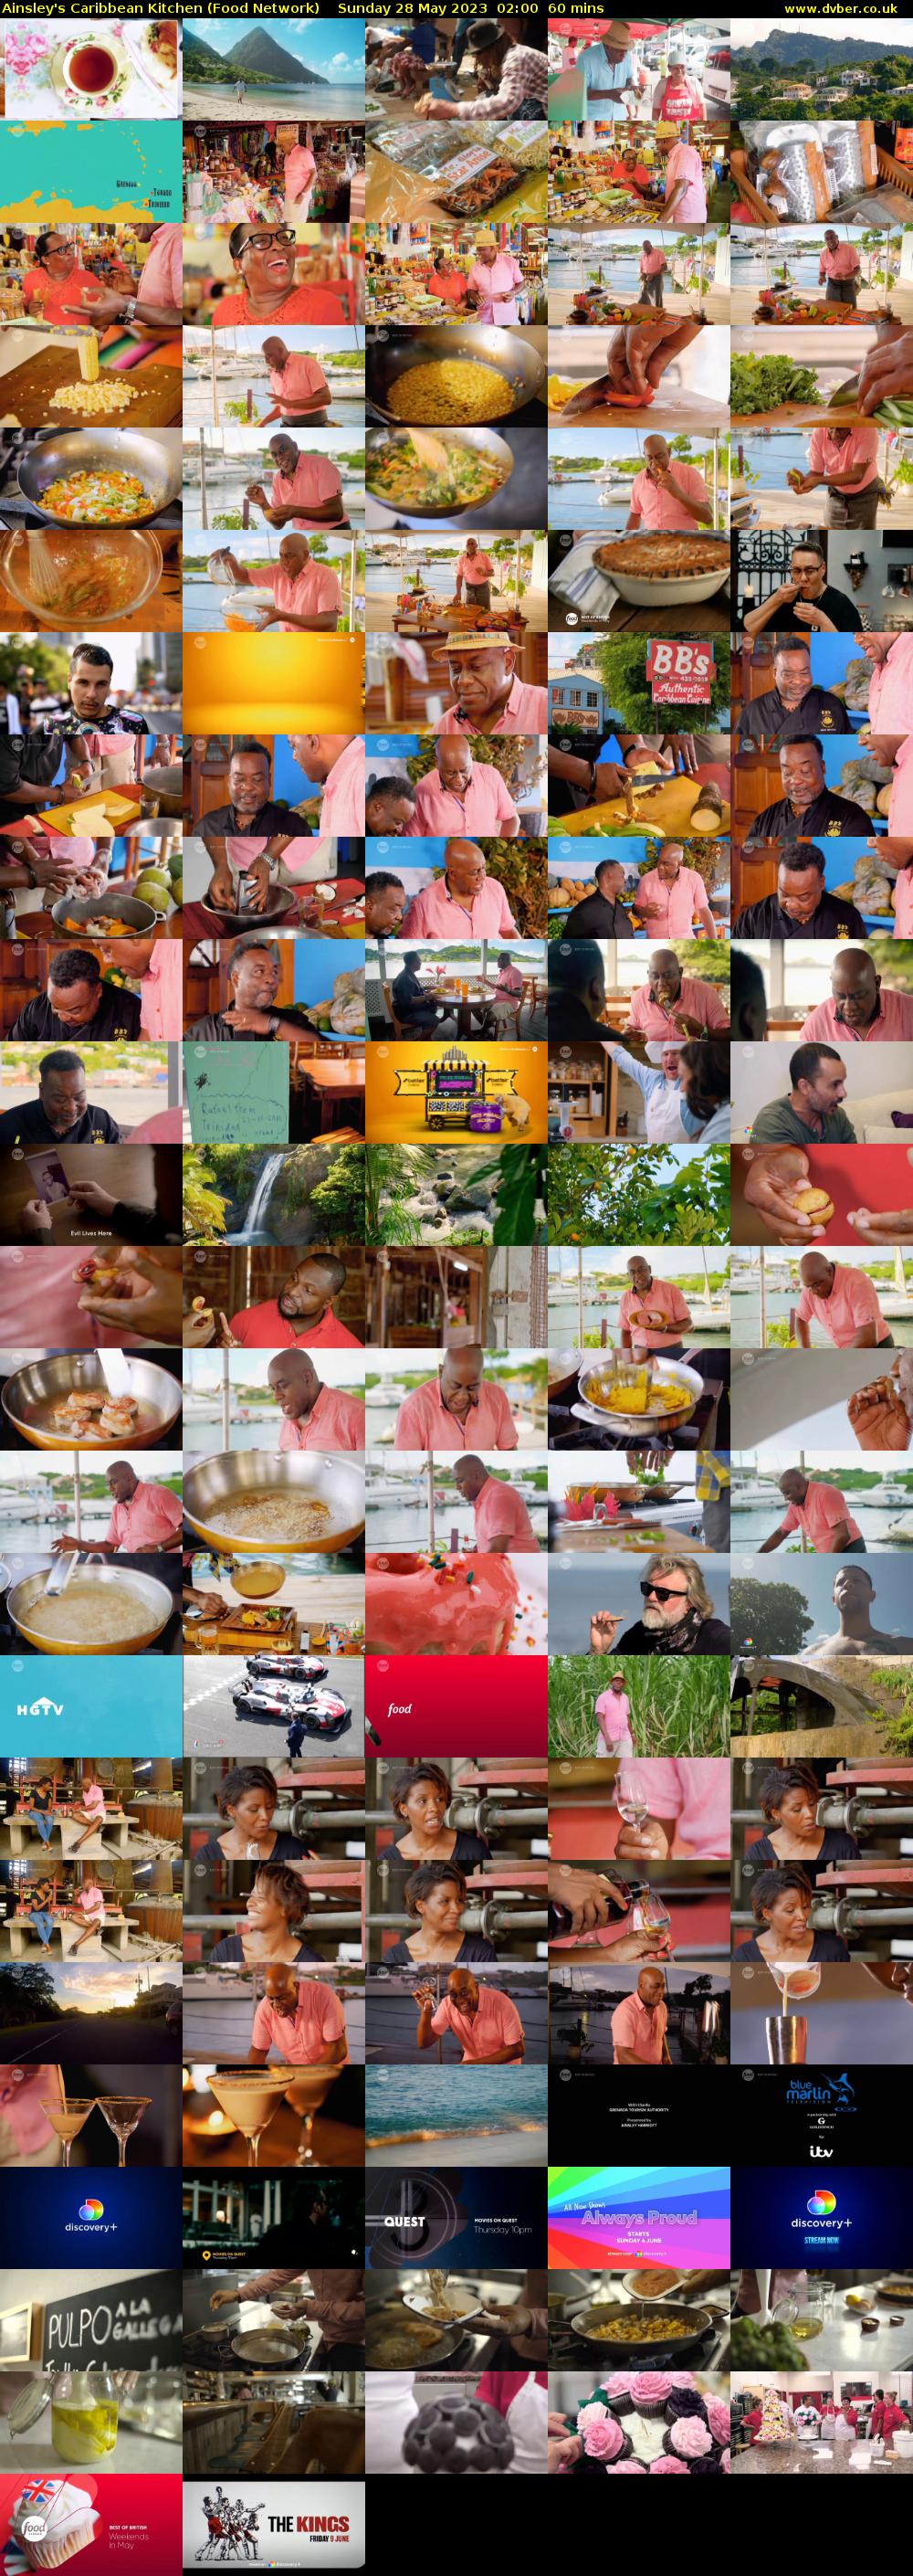 Ainsley's Caribbean Kitchen (Food Network) Sunday 28 May 2023 02:00 - 03:00